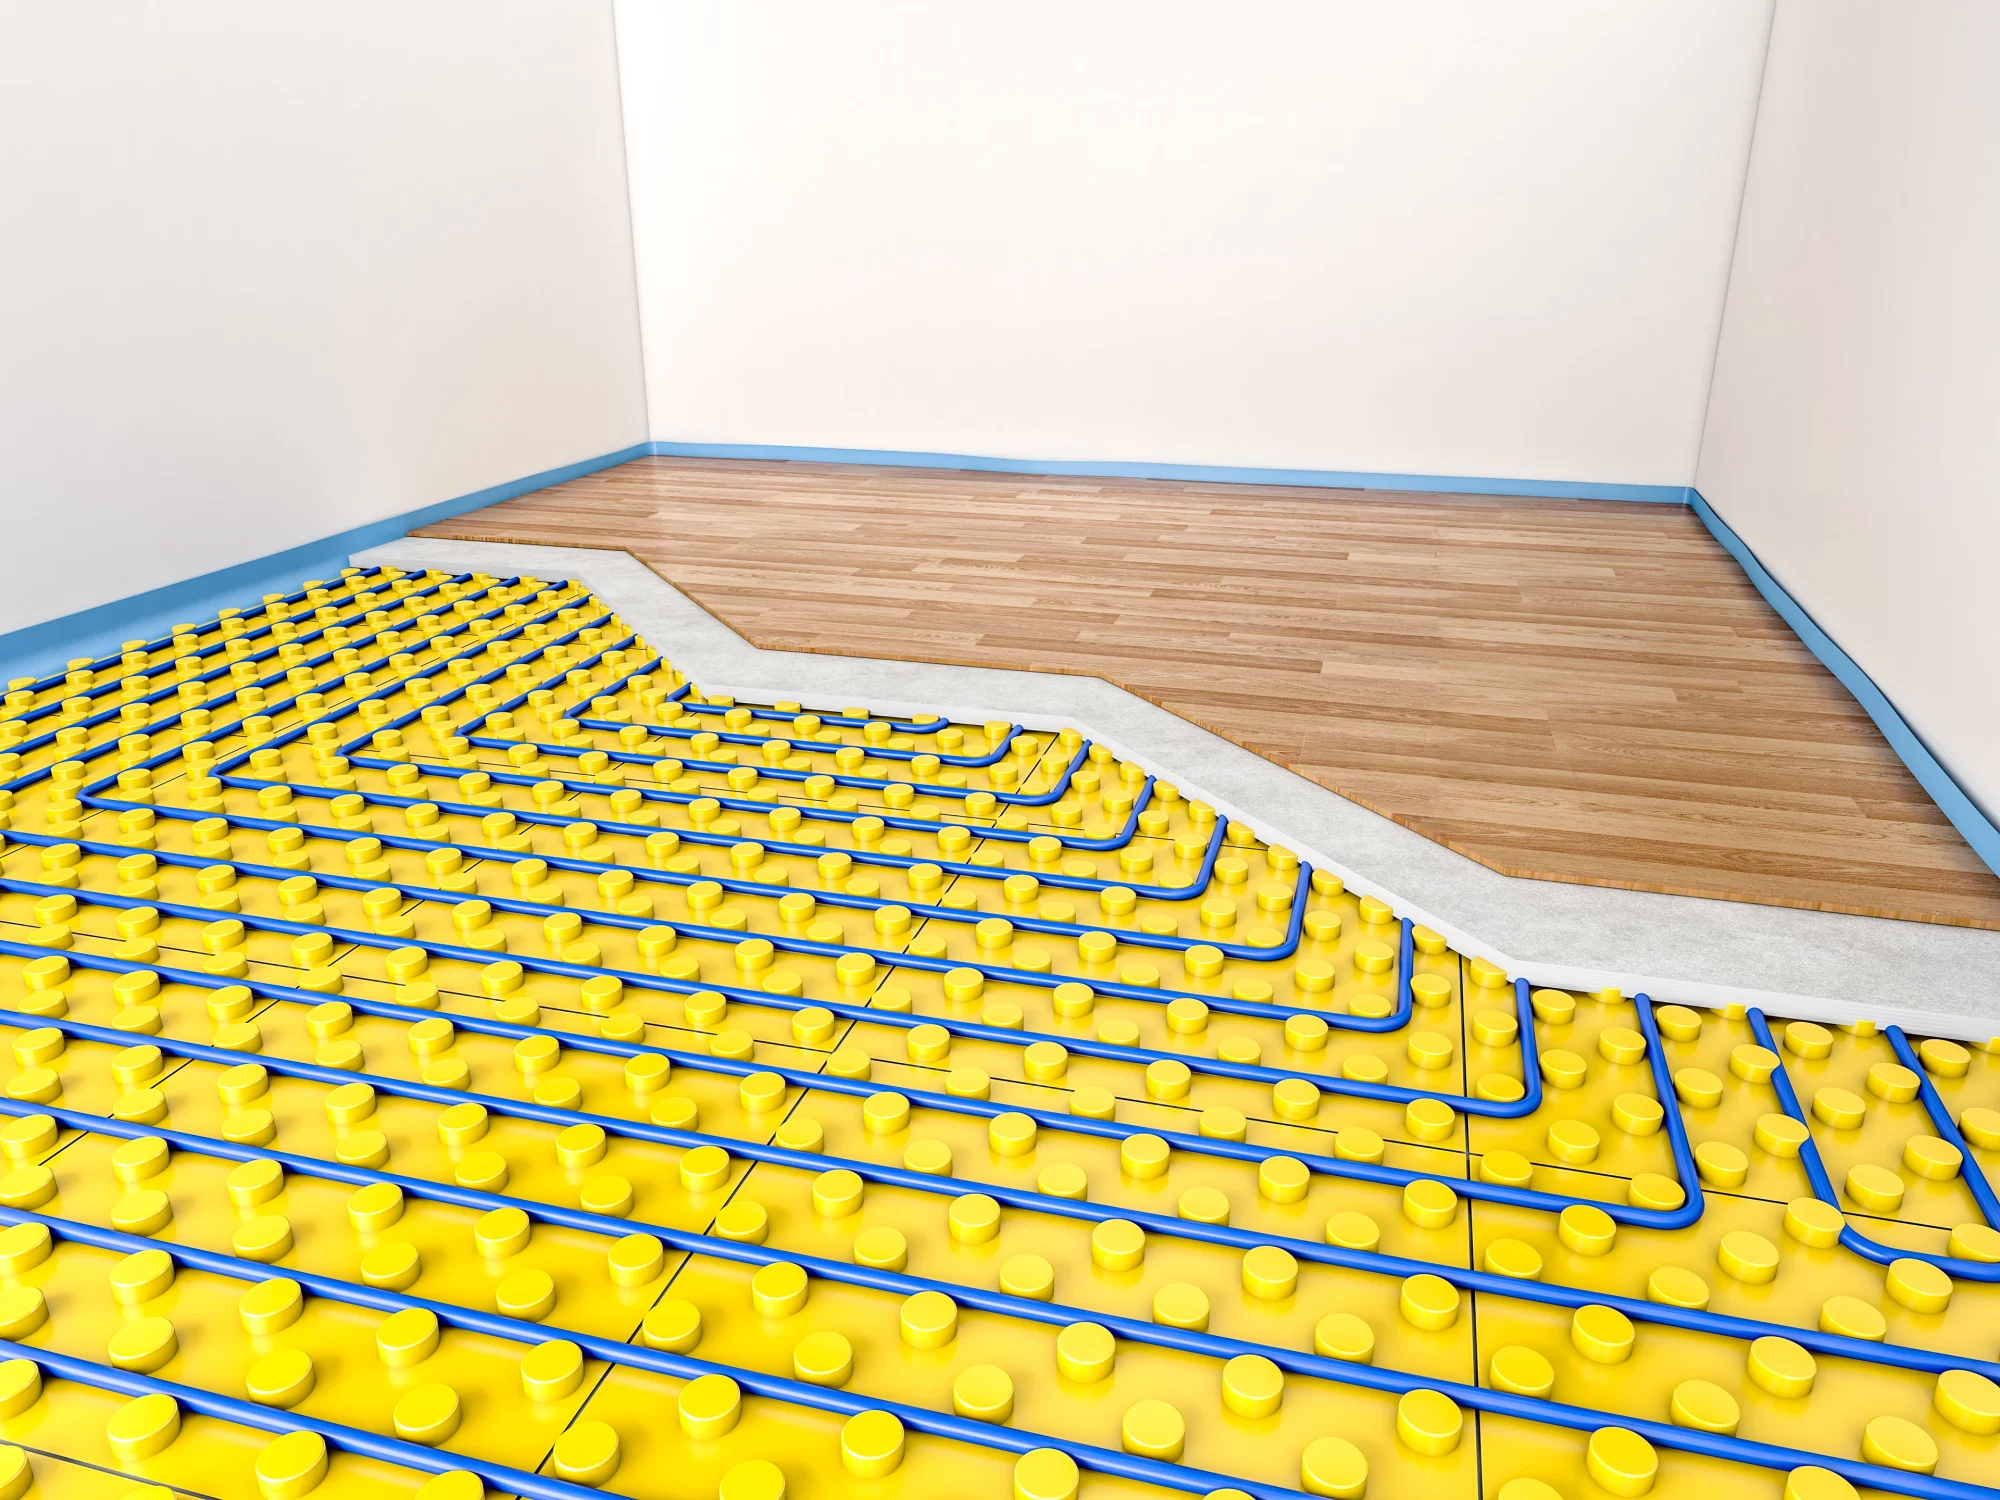 image with a new underfloor heating wet system showing also the ufh matt with pipe coils laid down and floor insulation with wood floor on top and insulation all around the edges